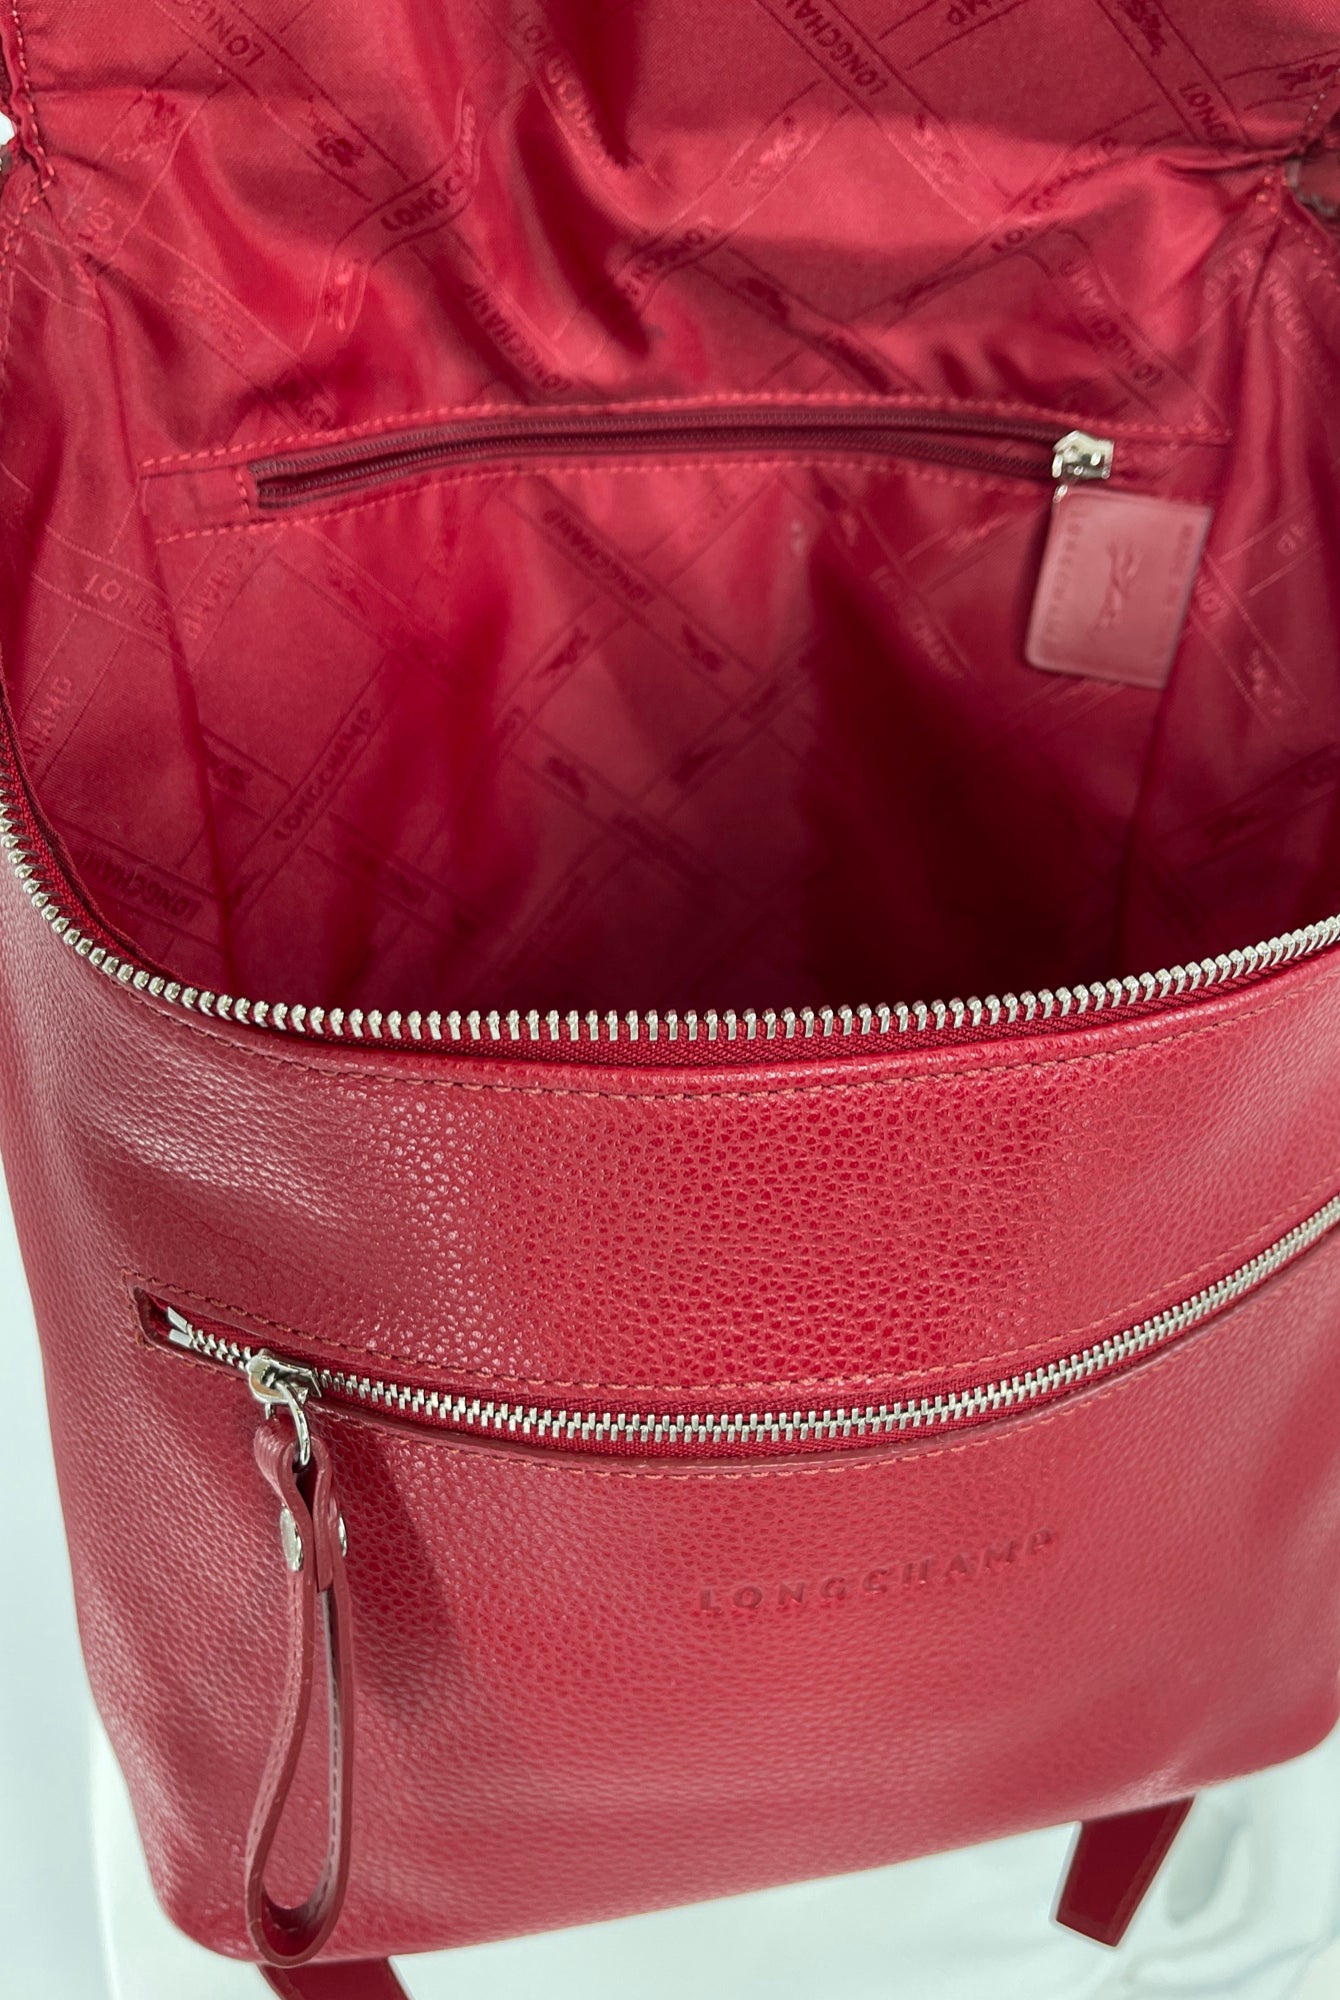 Longchamp Le Foulonne Red Leather Backpack